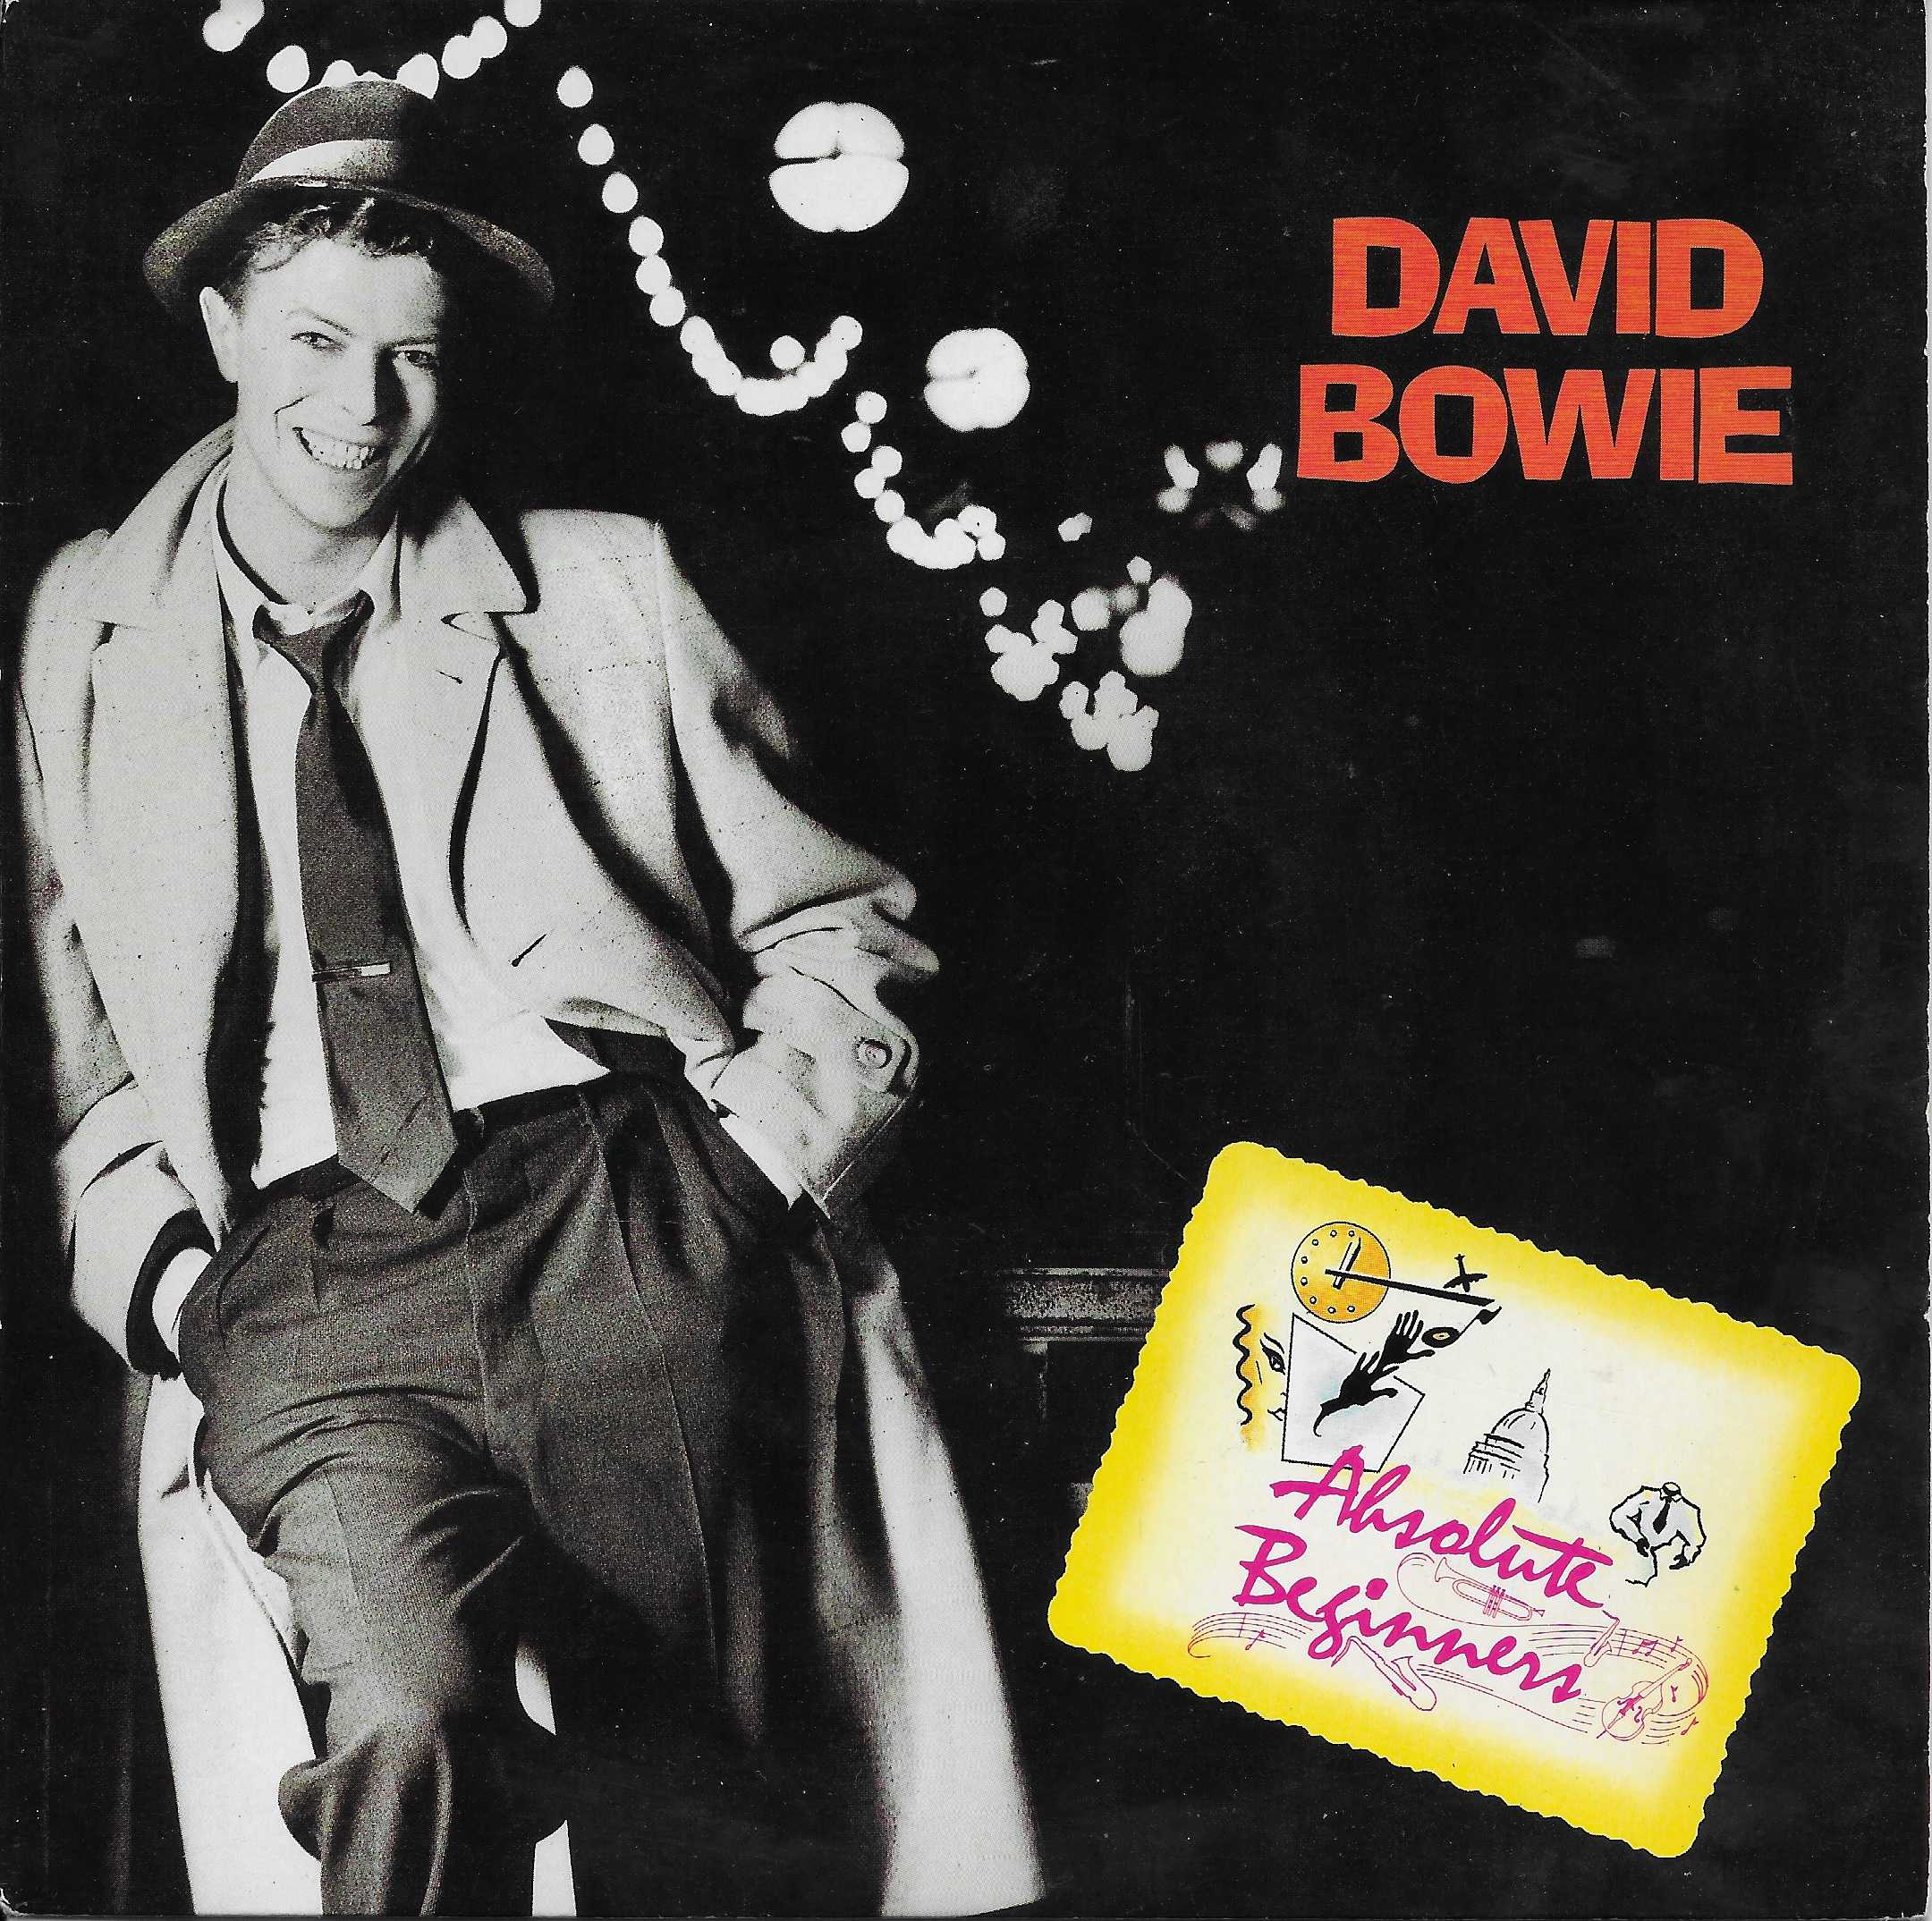 Picture of VS 838 Absolute beginners by artist David Bowie from ITV, Channel 4 and Channel 5 library